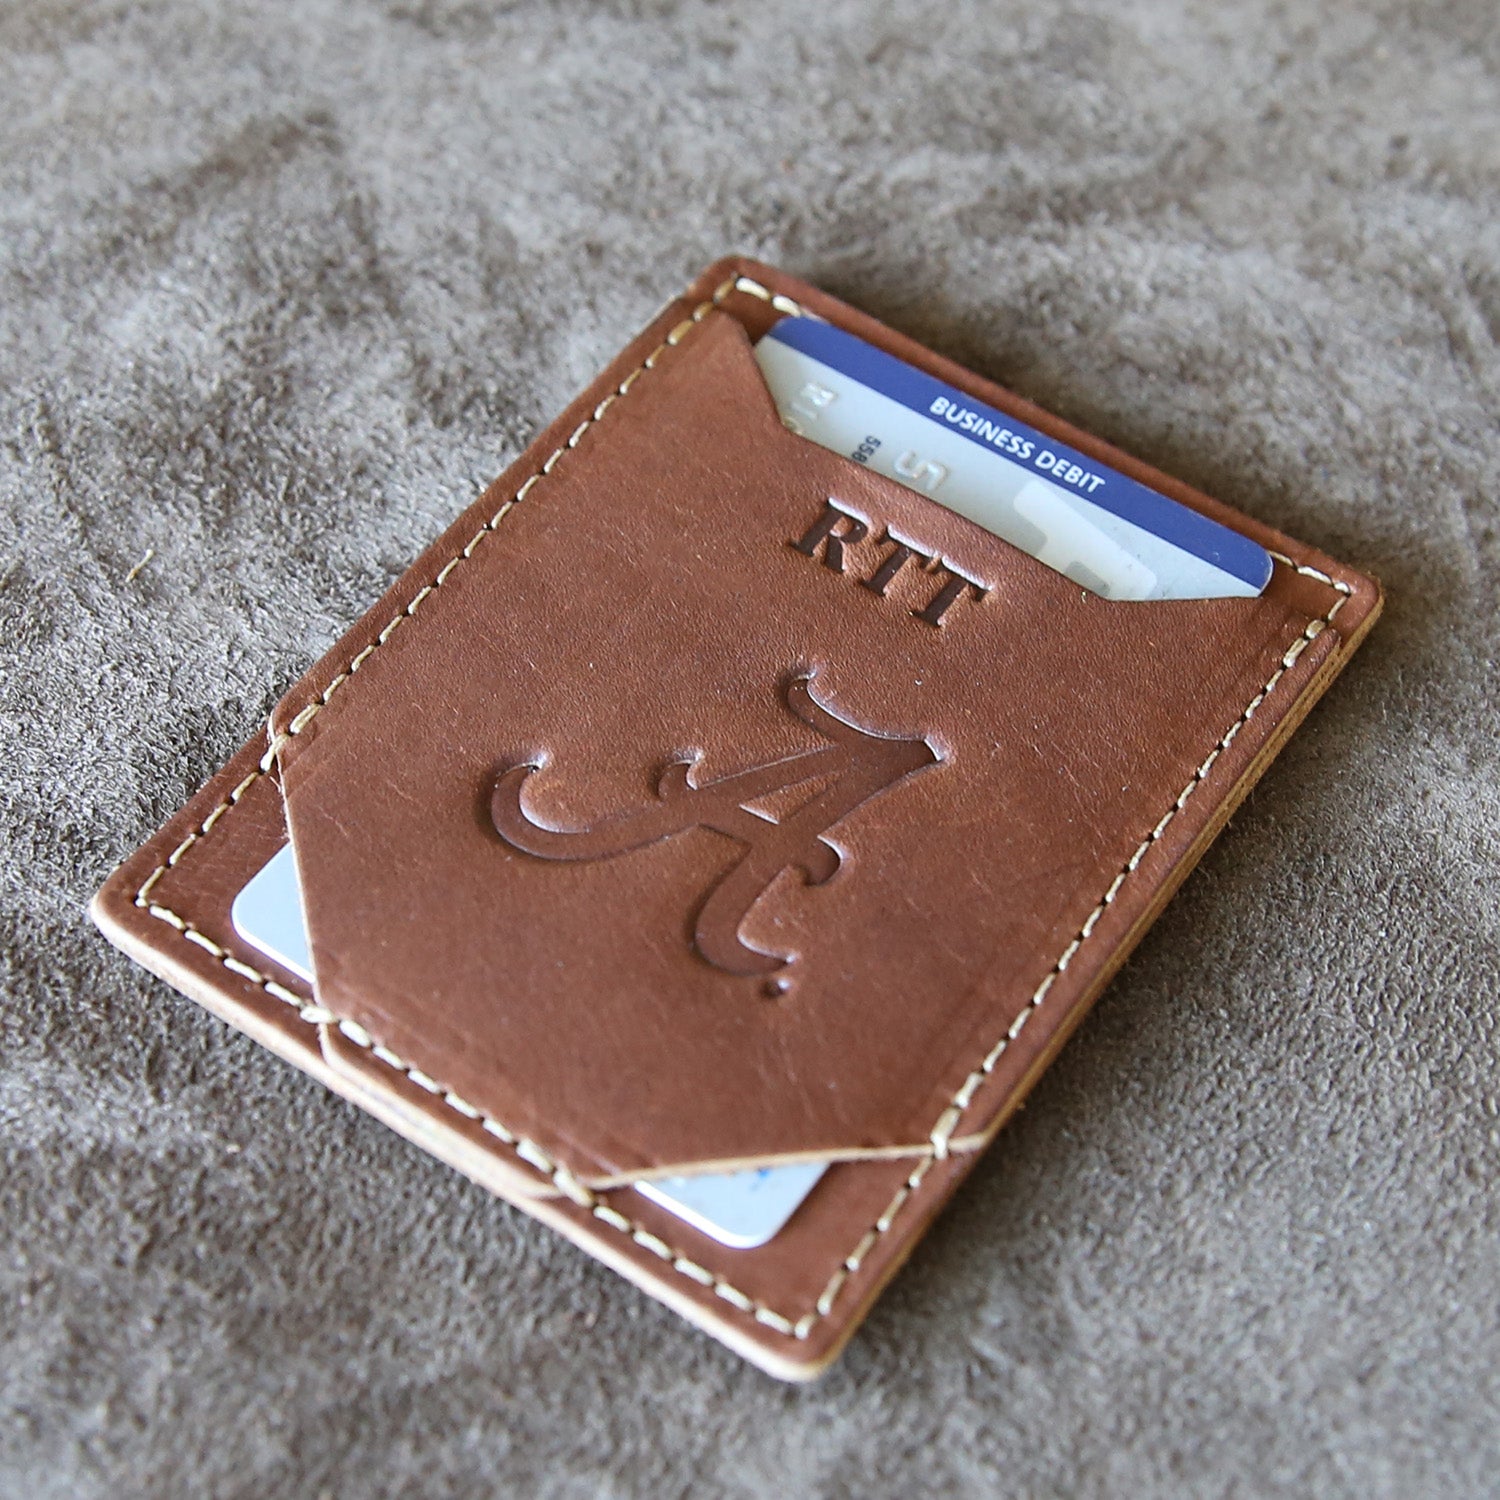 Fine leather money clip front pocket wallet with Alabama logo and personalized initials